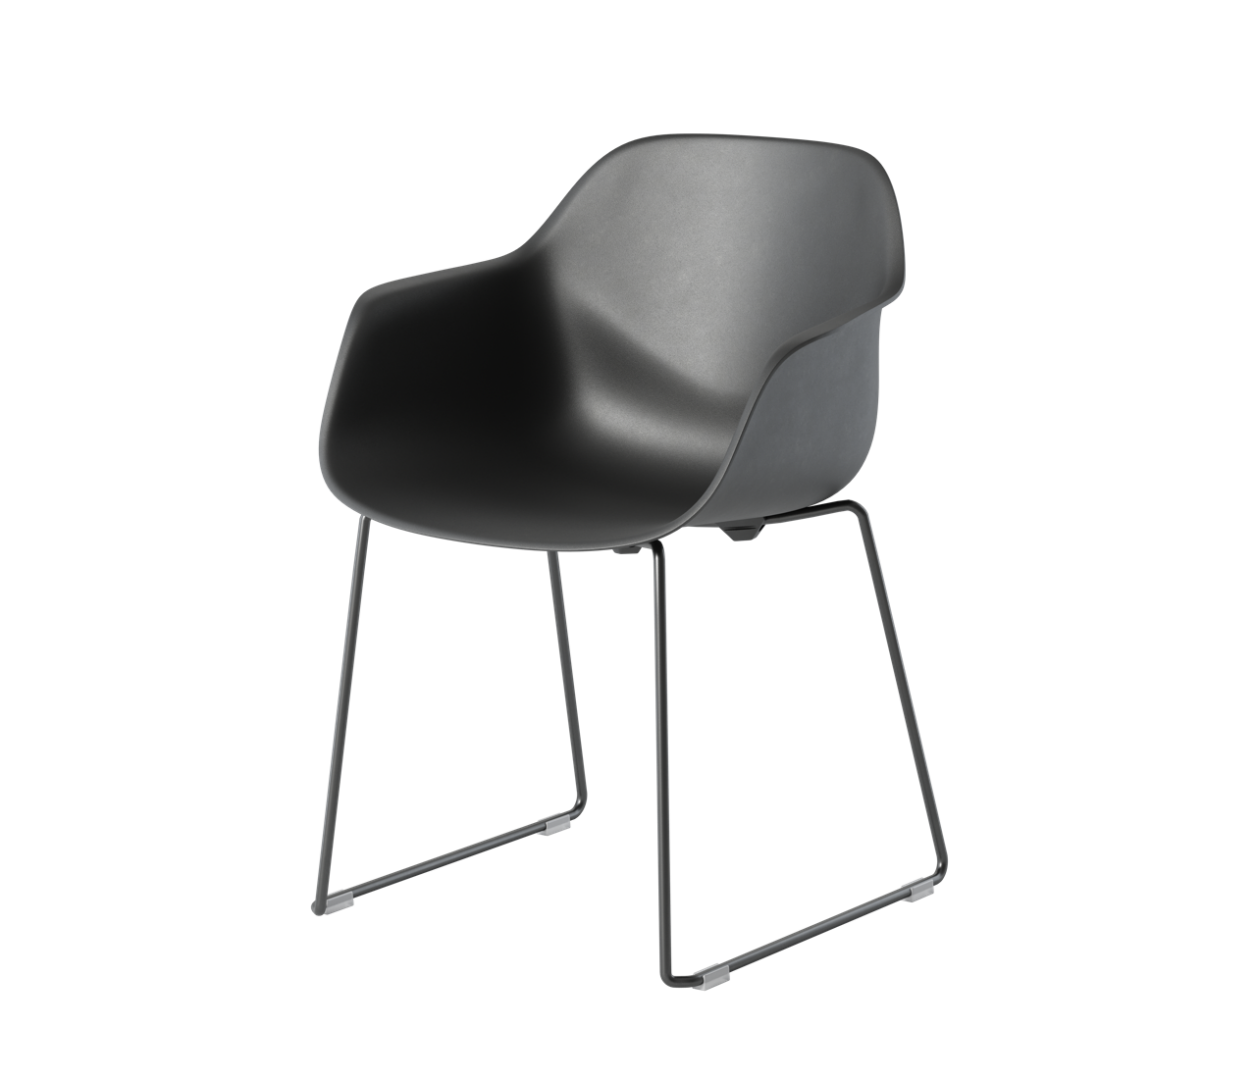 OCEE&FOUR – Chairs – FourMe 88 – Plastic shell - Skid Frame - Packshot Image 1 Large